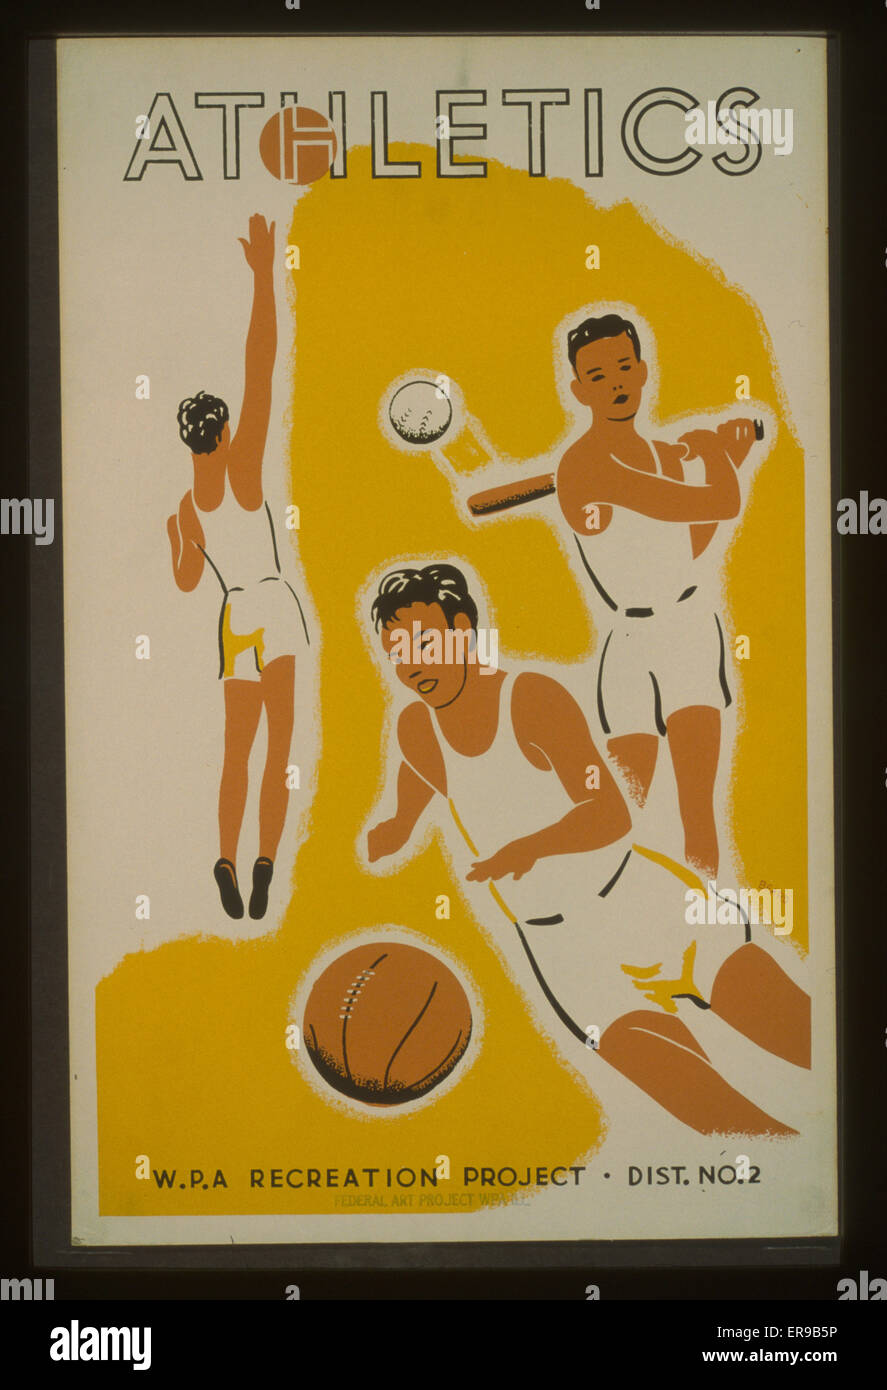 Athletics - WPA recreation project, Dist. No. 2. Poster showing youths playing basketball, baseball, and volleyball. Date 1939. Stock Photo